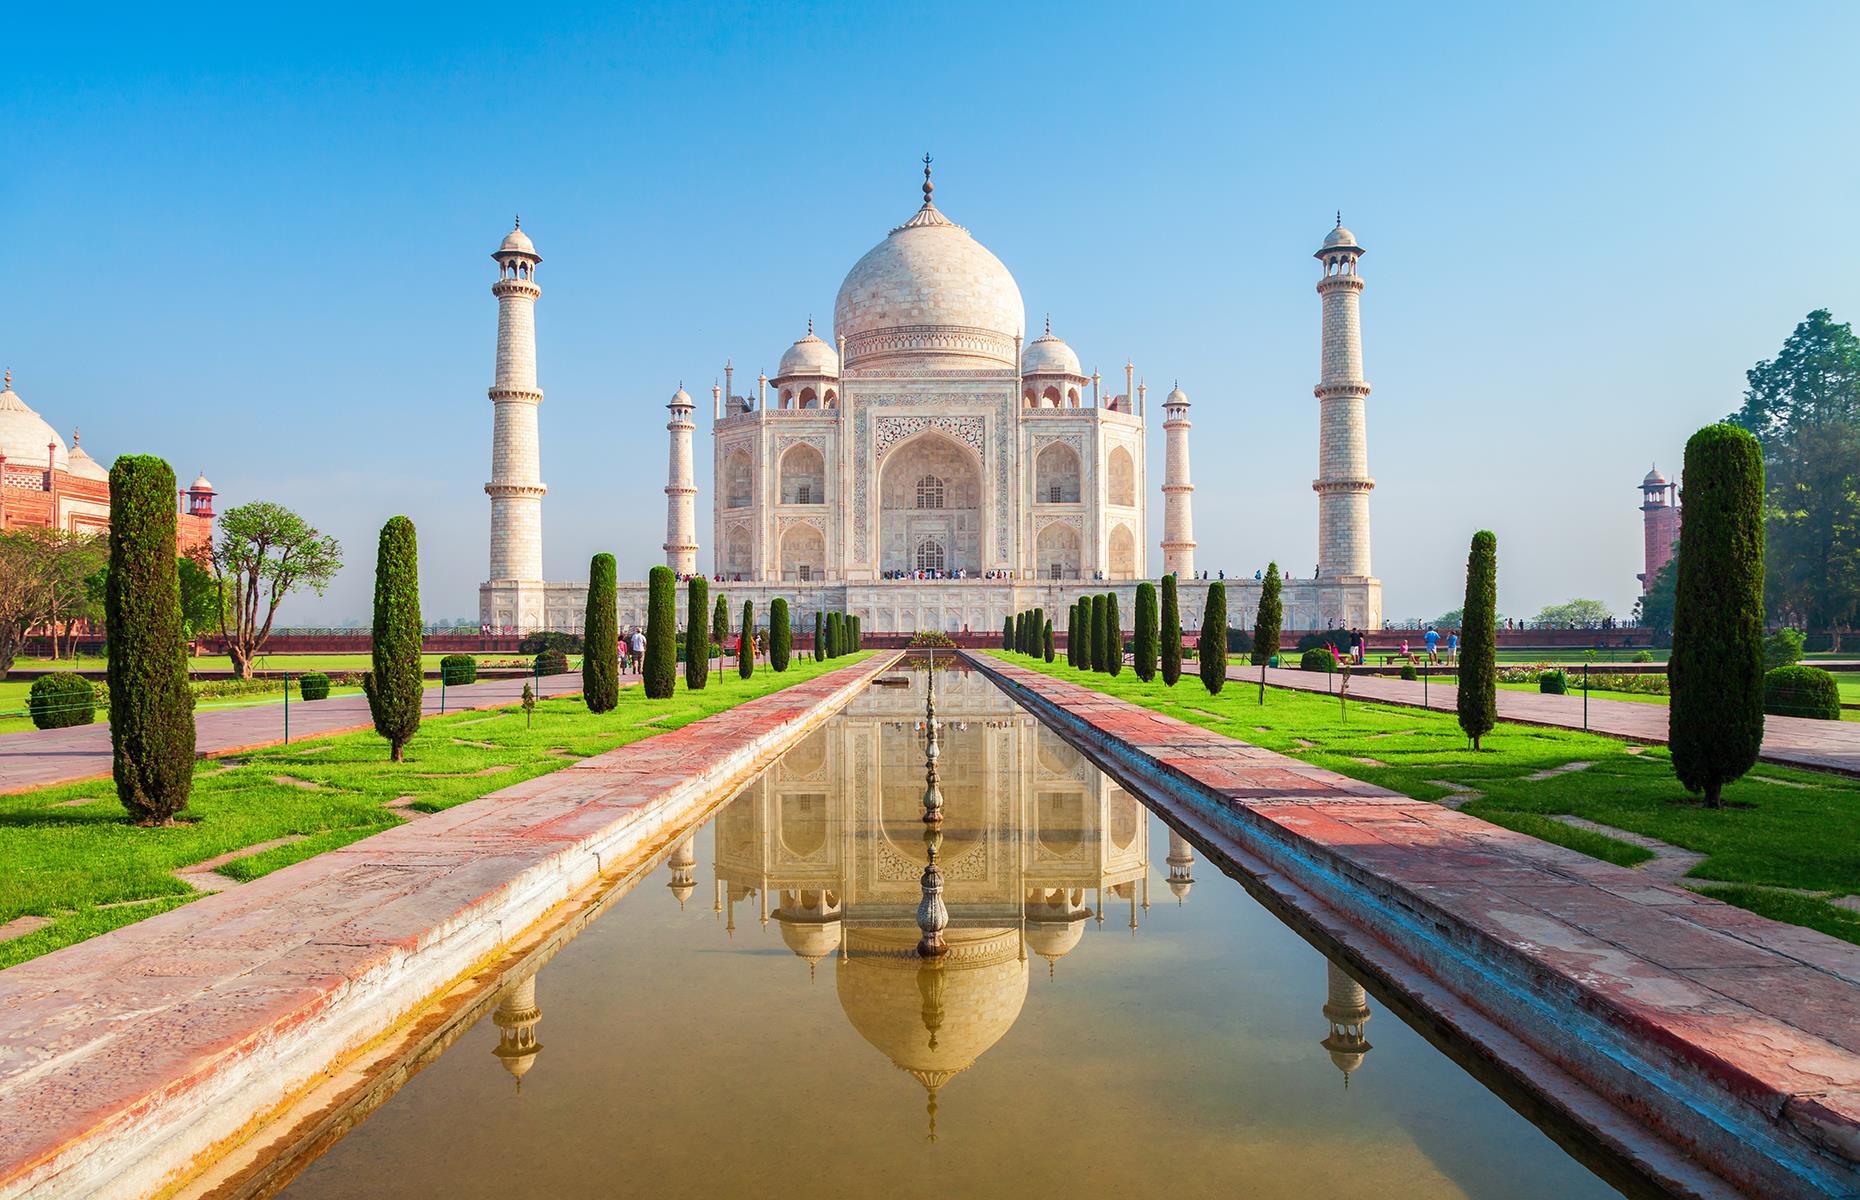 An enduring symbol of India, the Taj Mahal is one of the most photographed landmarks on Earth. But there’s nothing like seeing this marble masterpiece in the flesh. Millions of tourists make the pilgrimage here every year but you can shake off (some of) the crowds by arriving at first dawn.